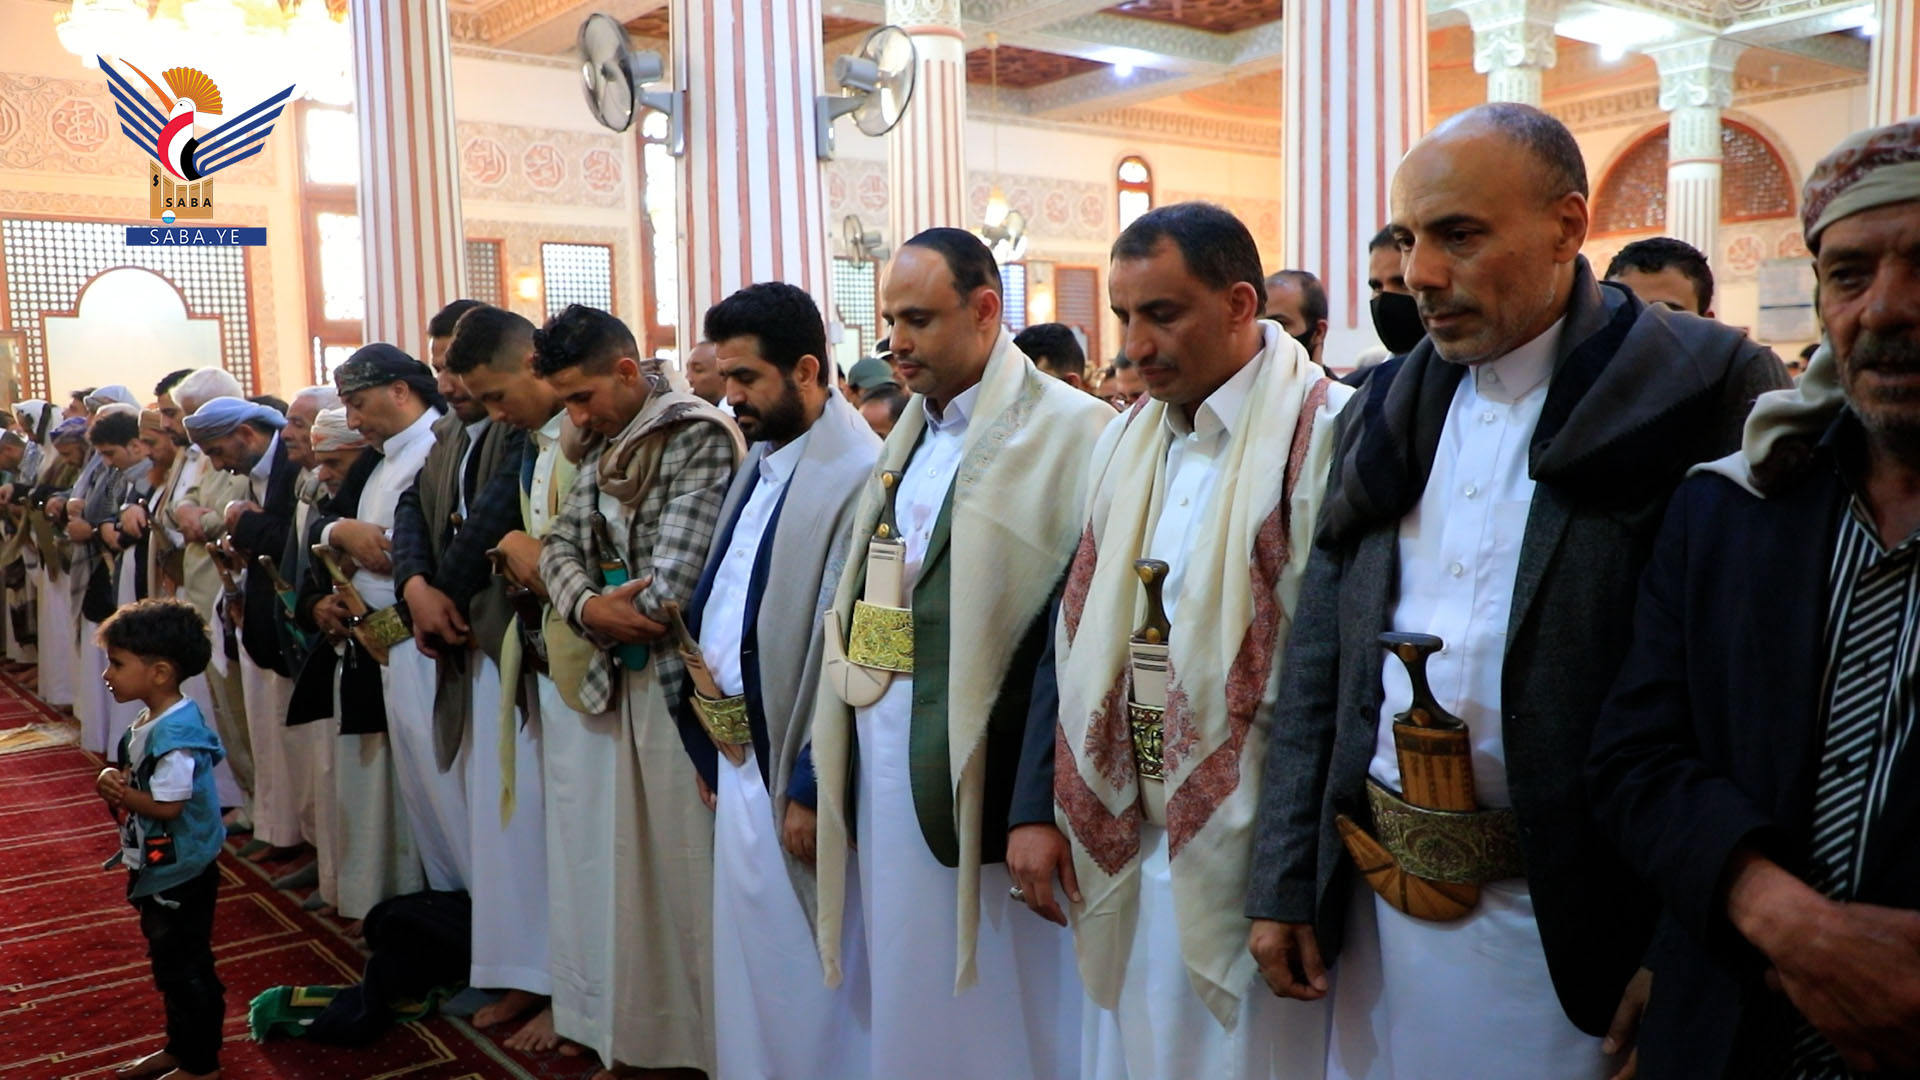  President Al-Mashat performs Eid al-Adha prayer at Martyrs' Mosque & receives well-wishers at Presidency House in capital, Sana'a